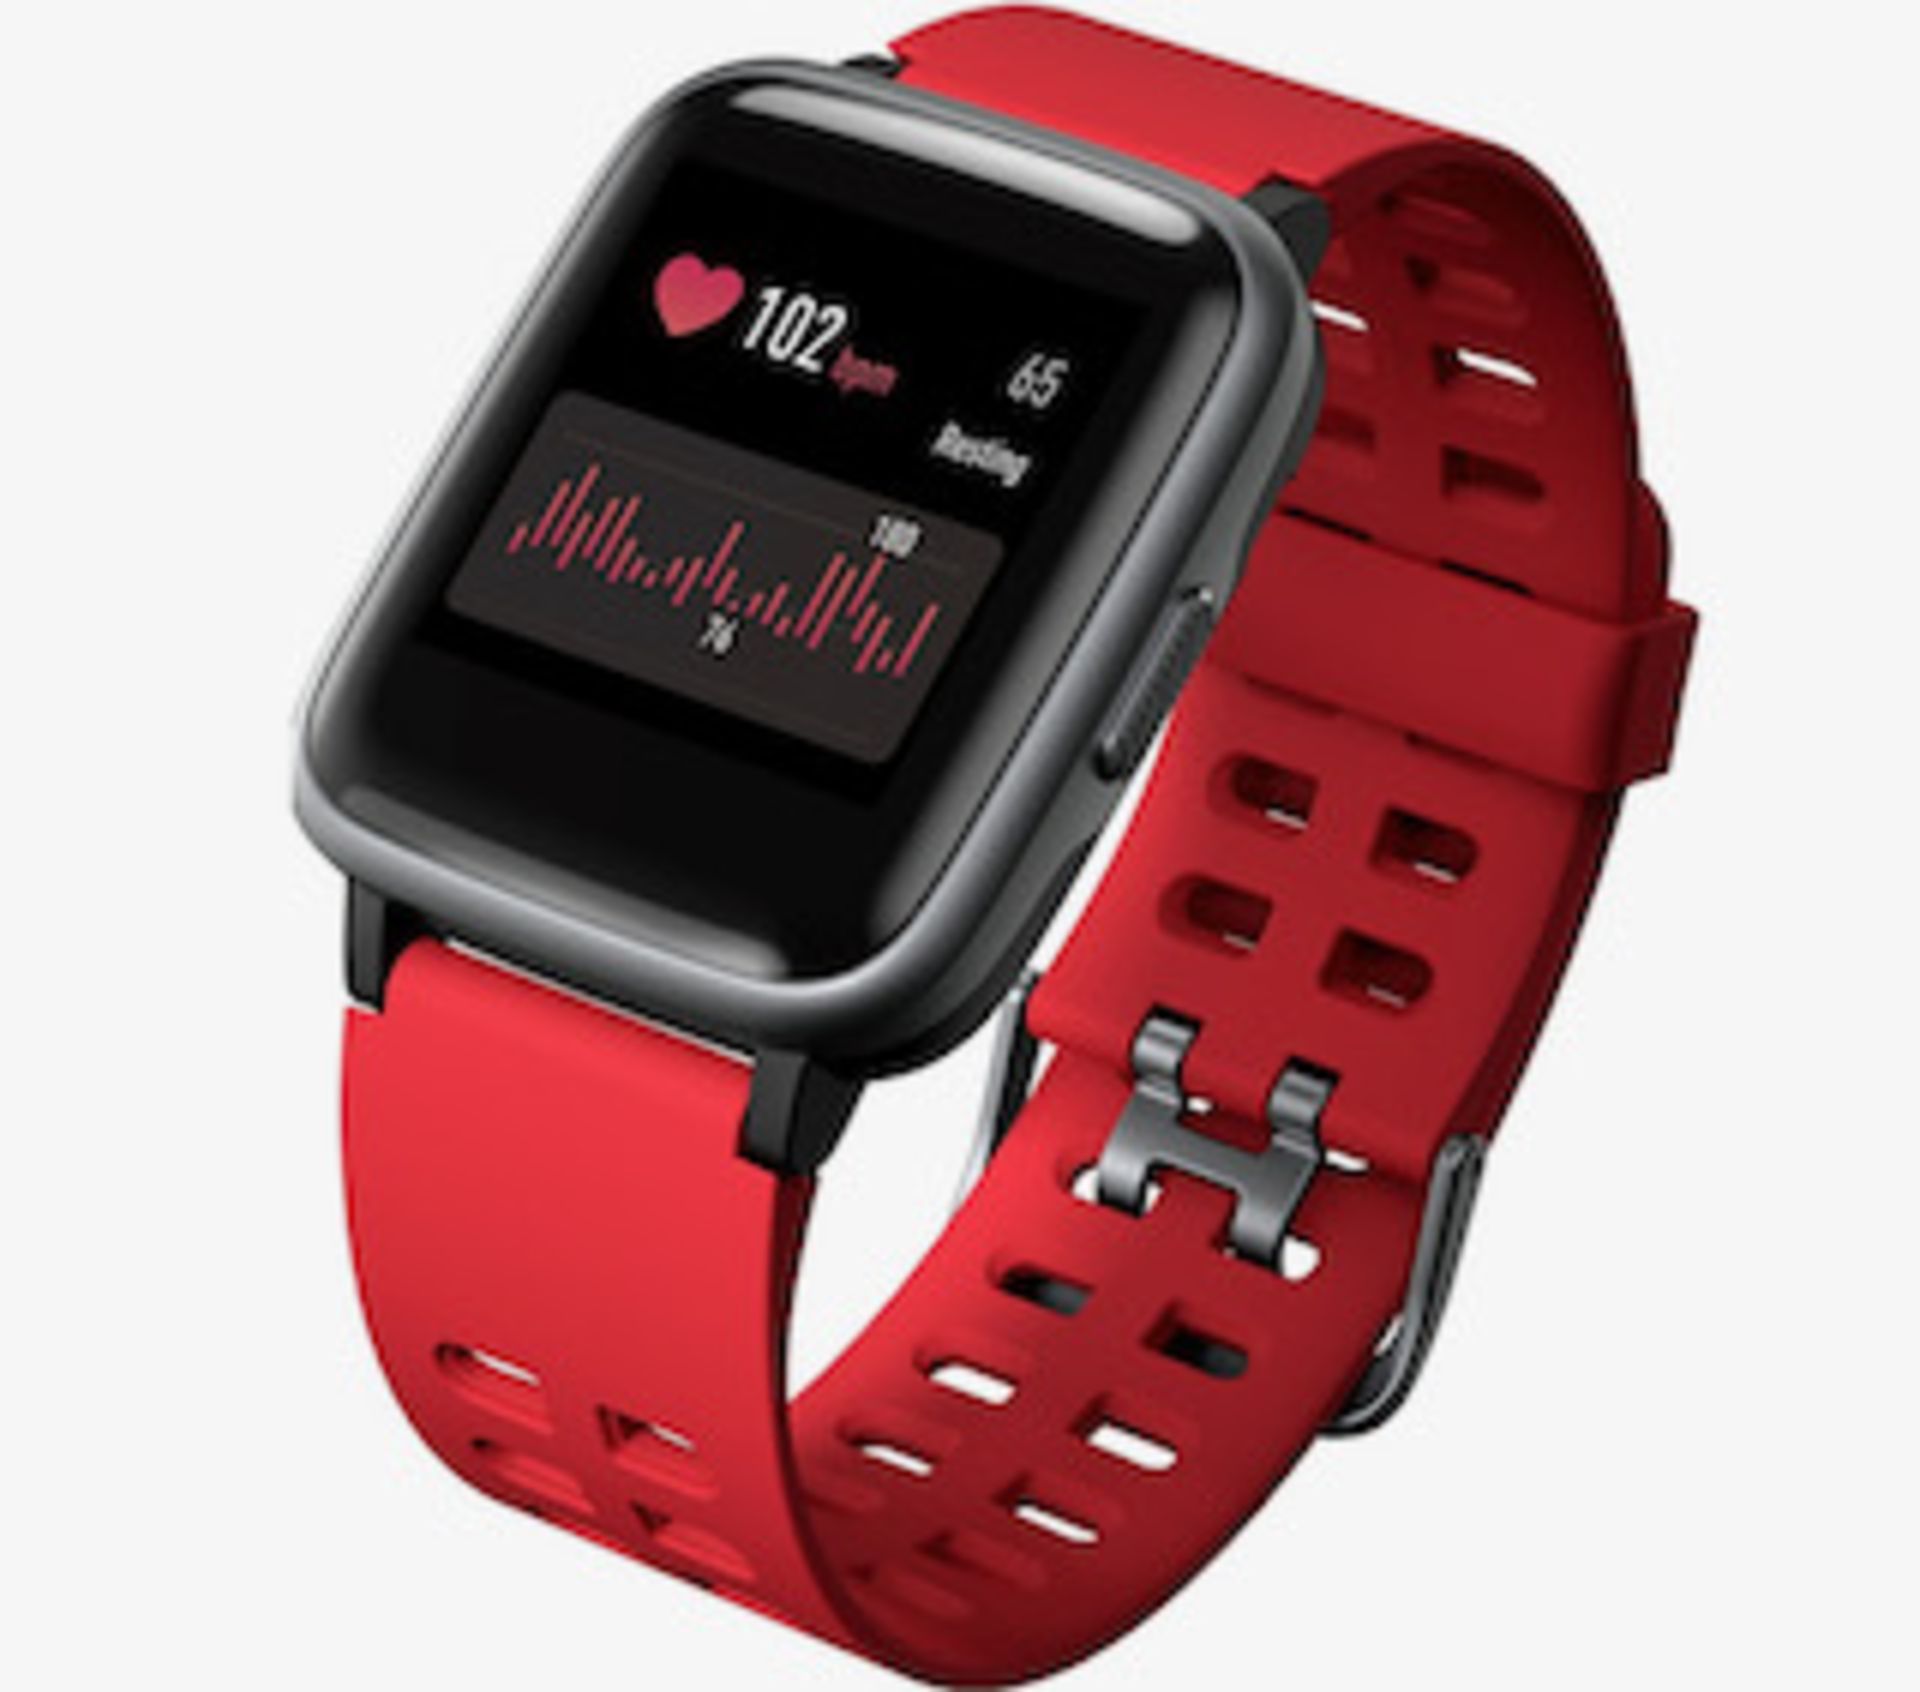 Brand New Unisex Fitness Tracker Watch Id205 Red Strap About This Item 1.3-Inch LCD Colour - Image 18 of 34